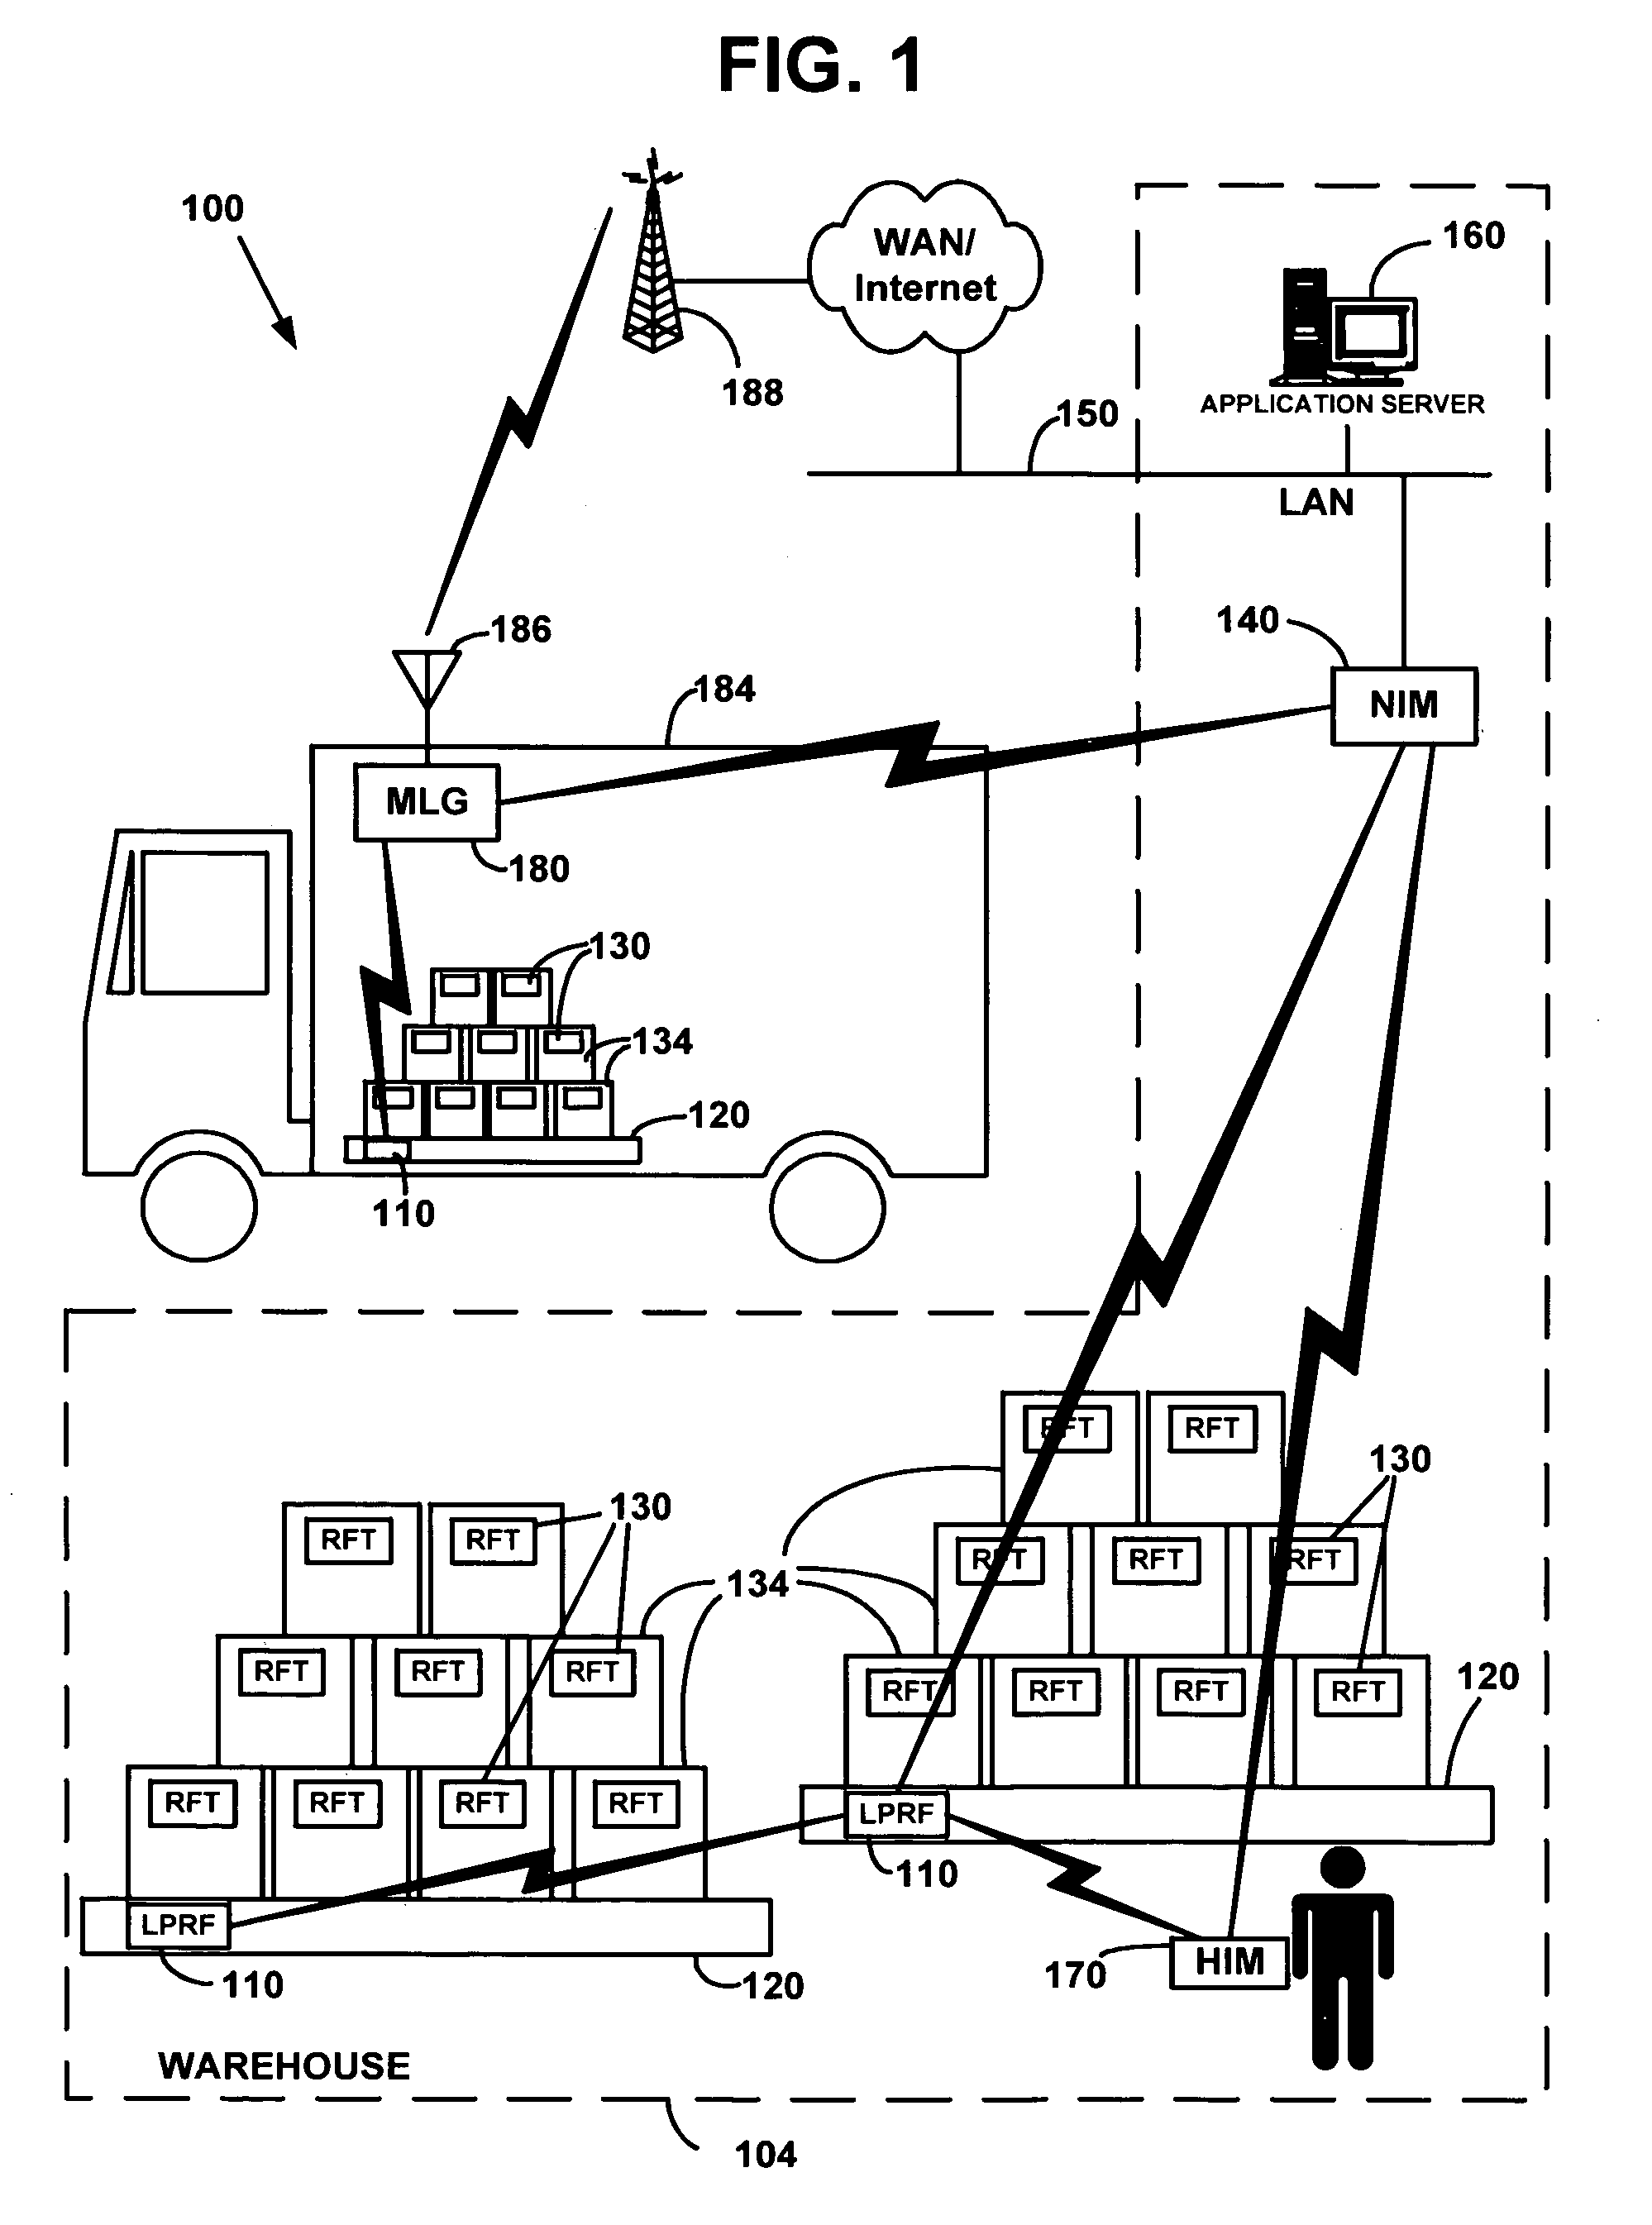 Forming communication cluster of wireless AD HOC network based on common designation